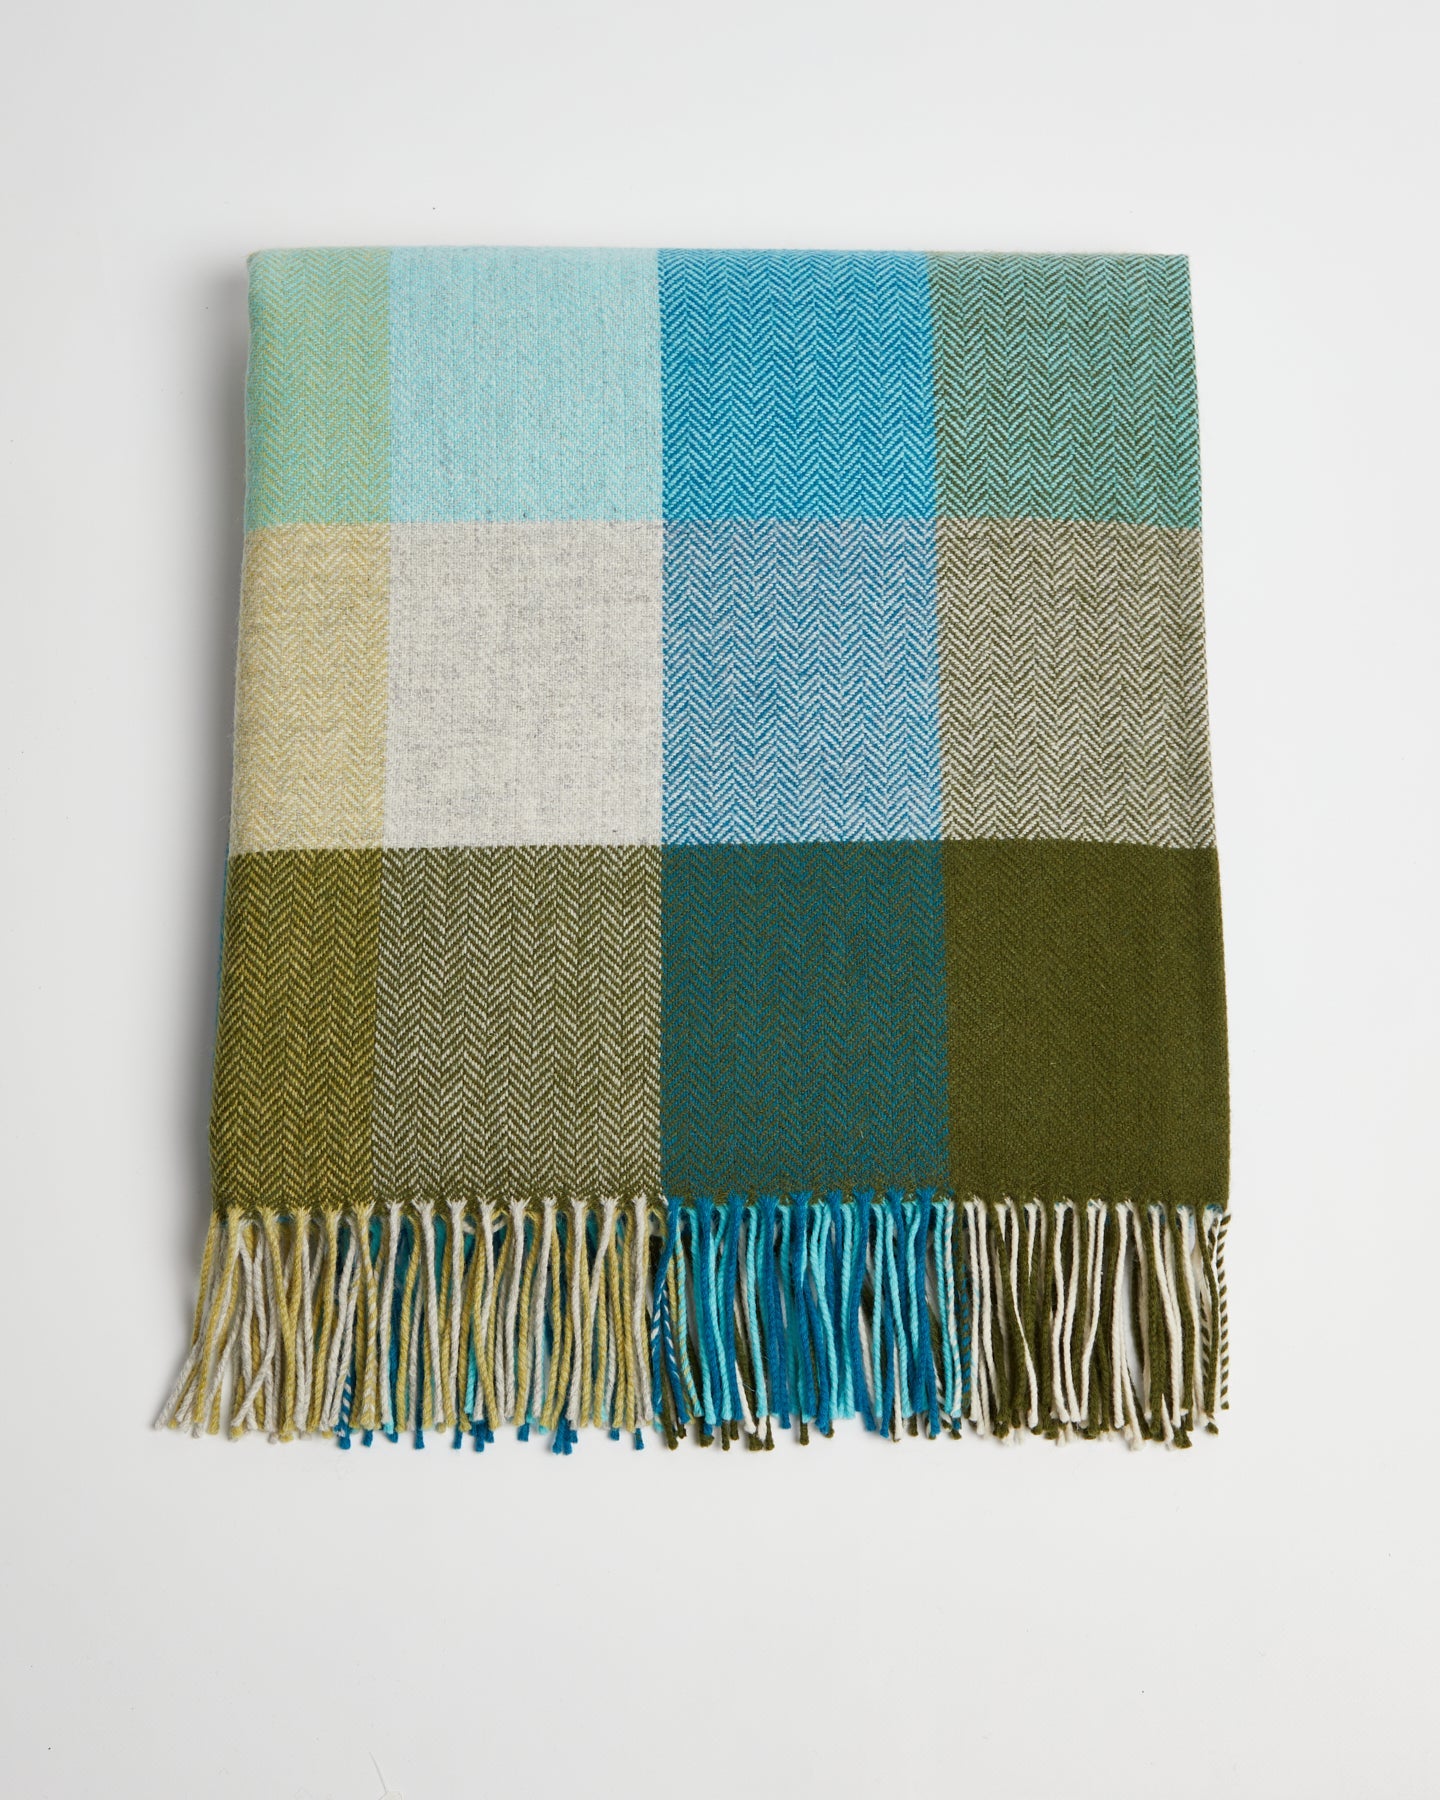 Foxford, Neale Multi Check Lambswool Throw